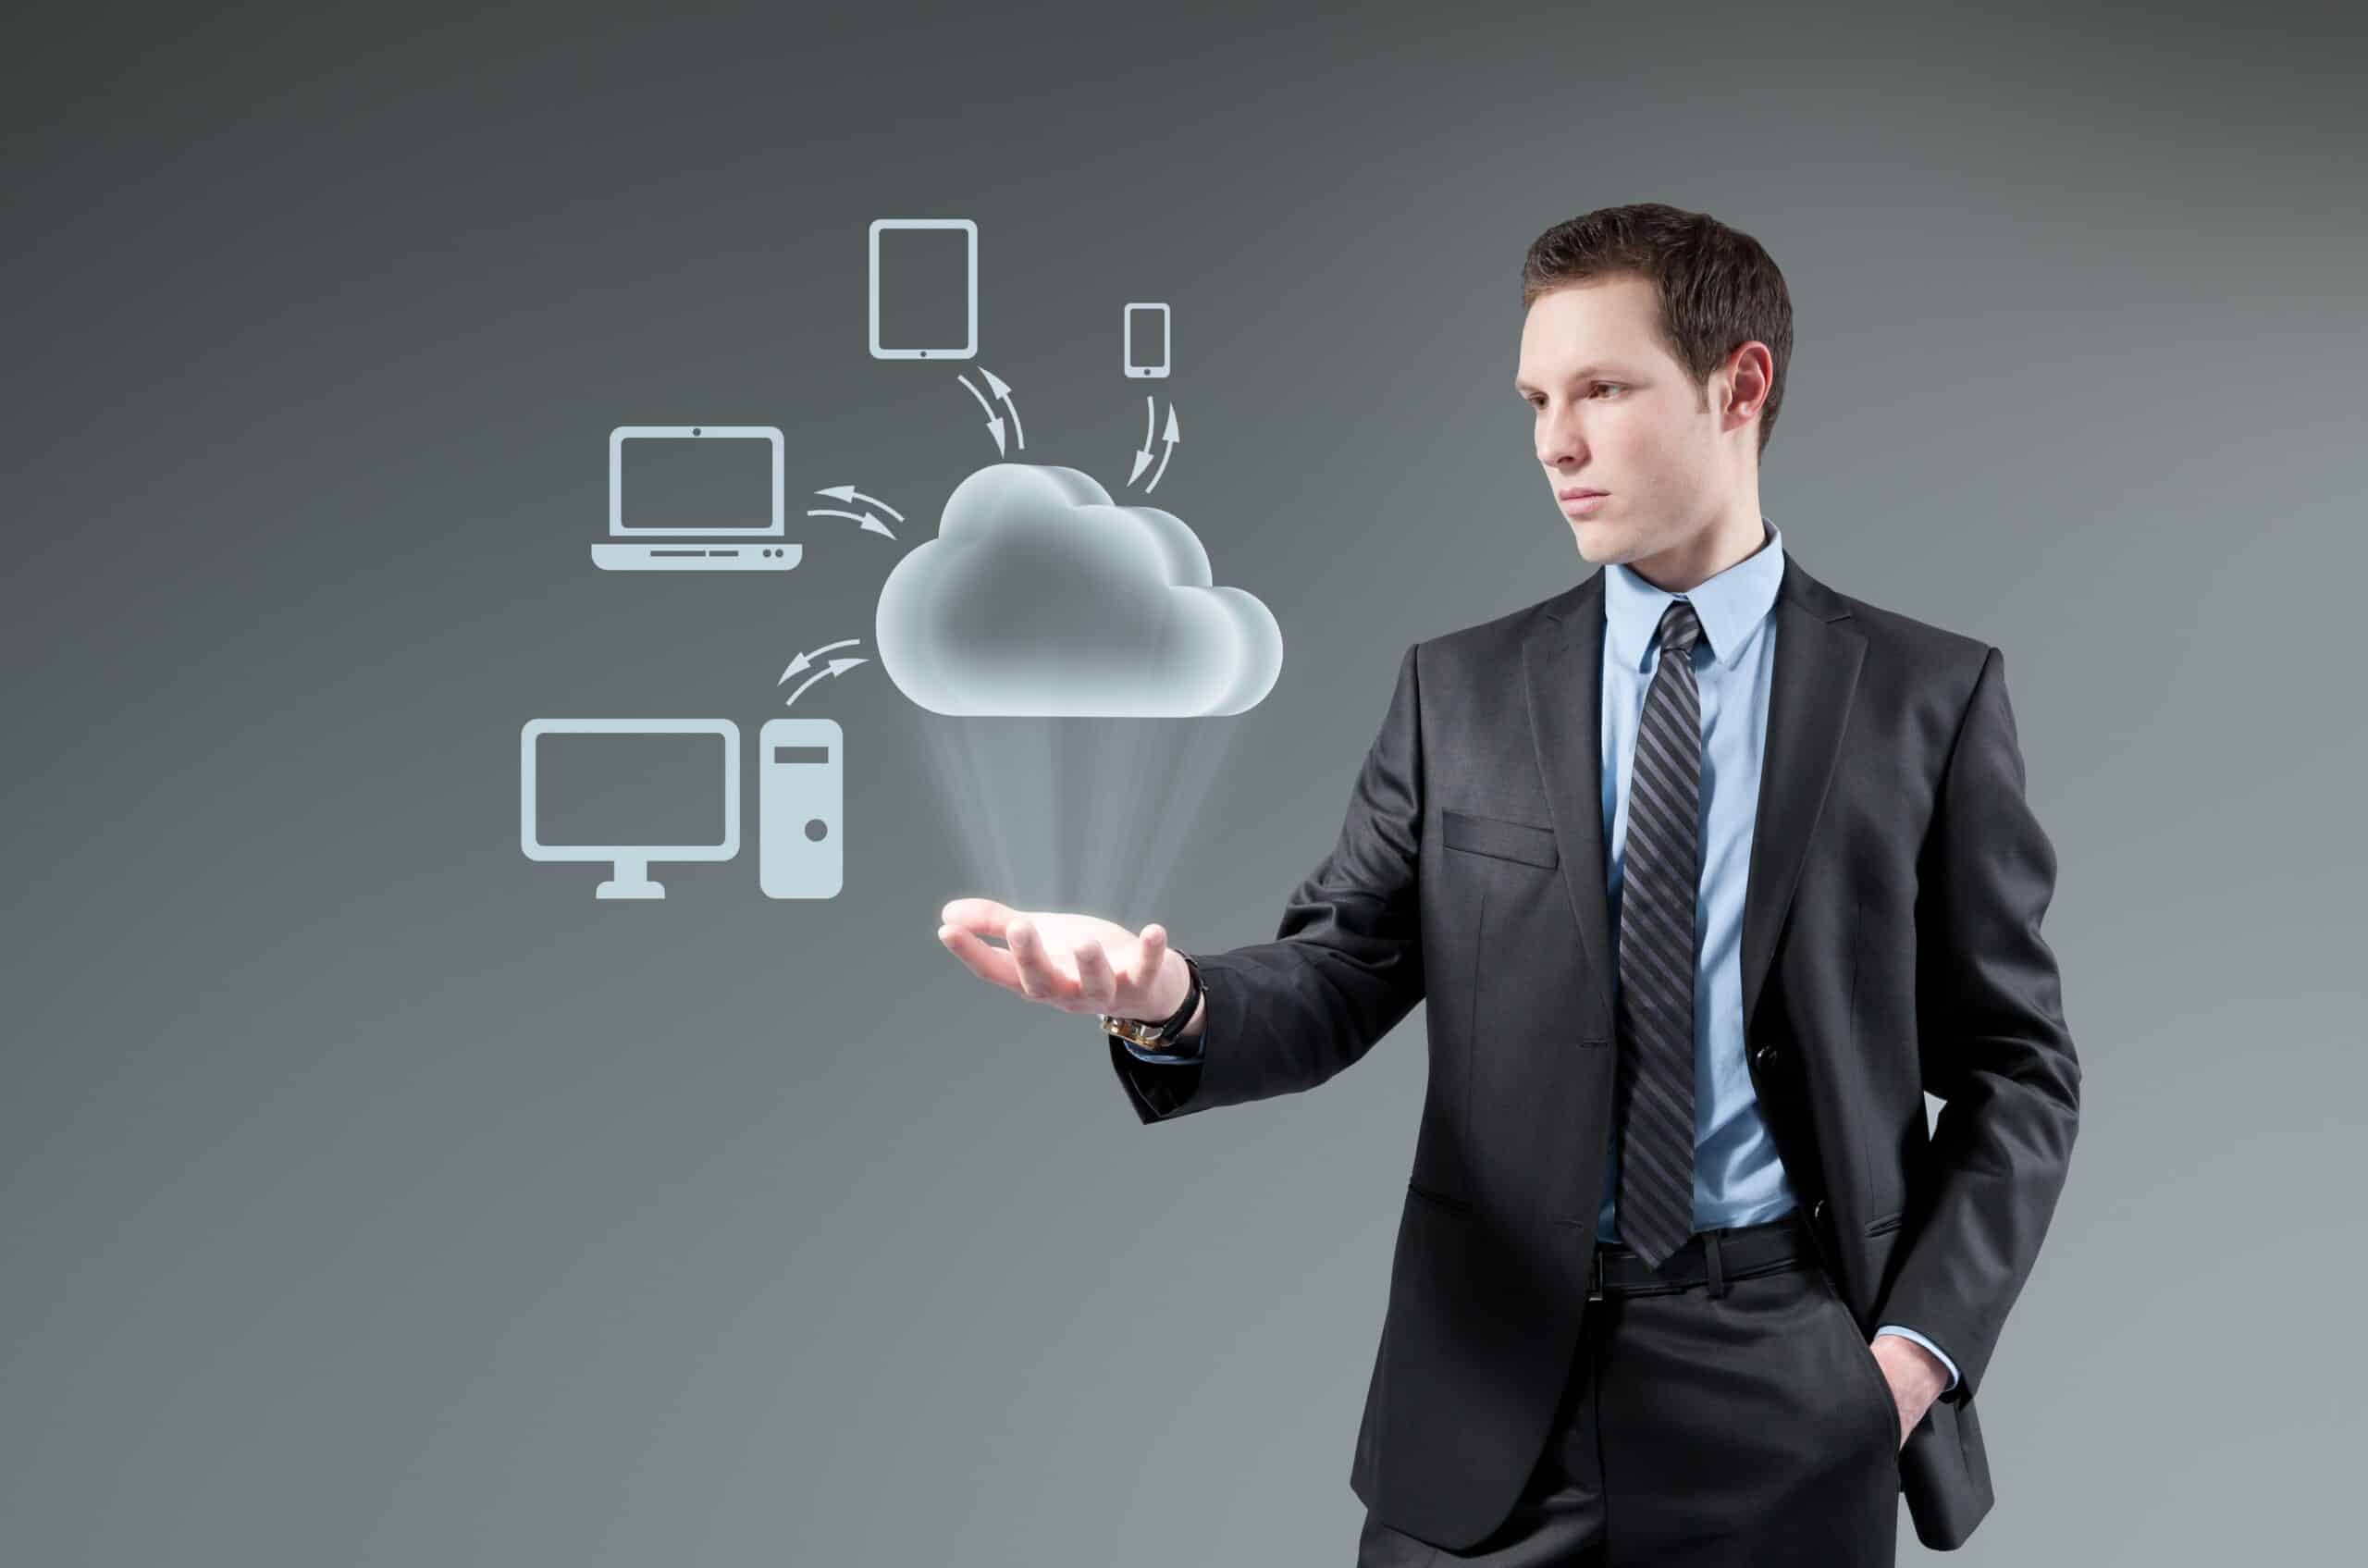 Why Law Firms Should Consider UniVoIP for Their Cloud-Based VoIP Services